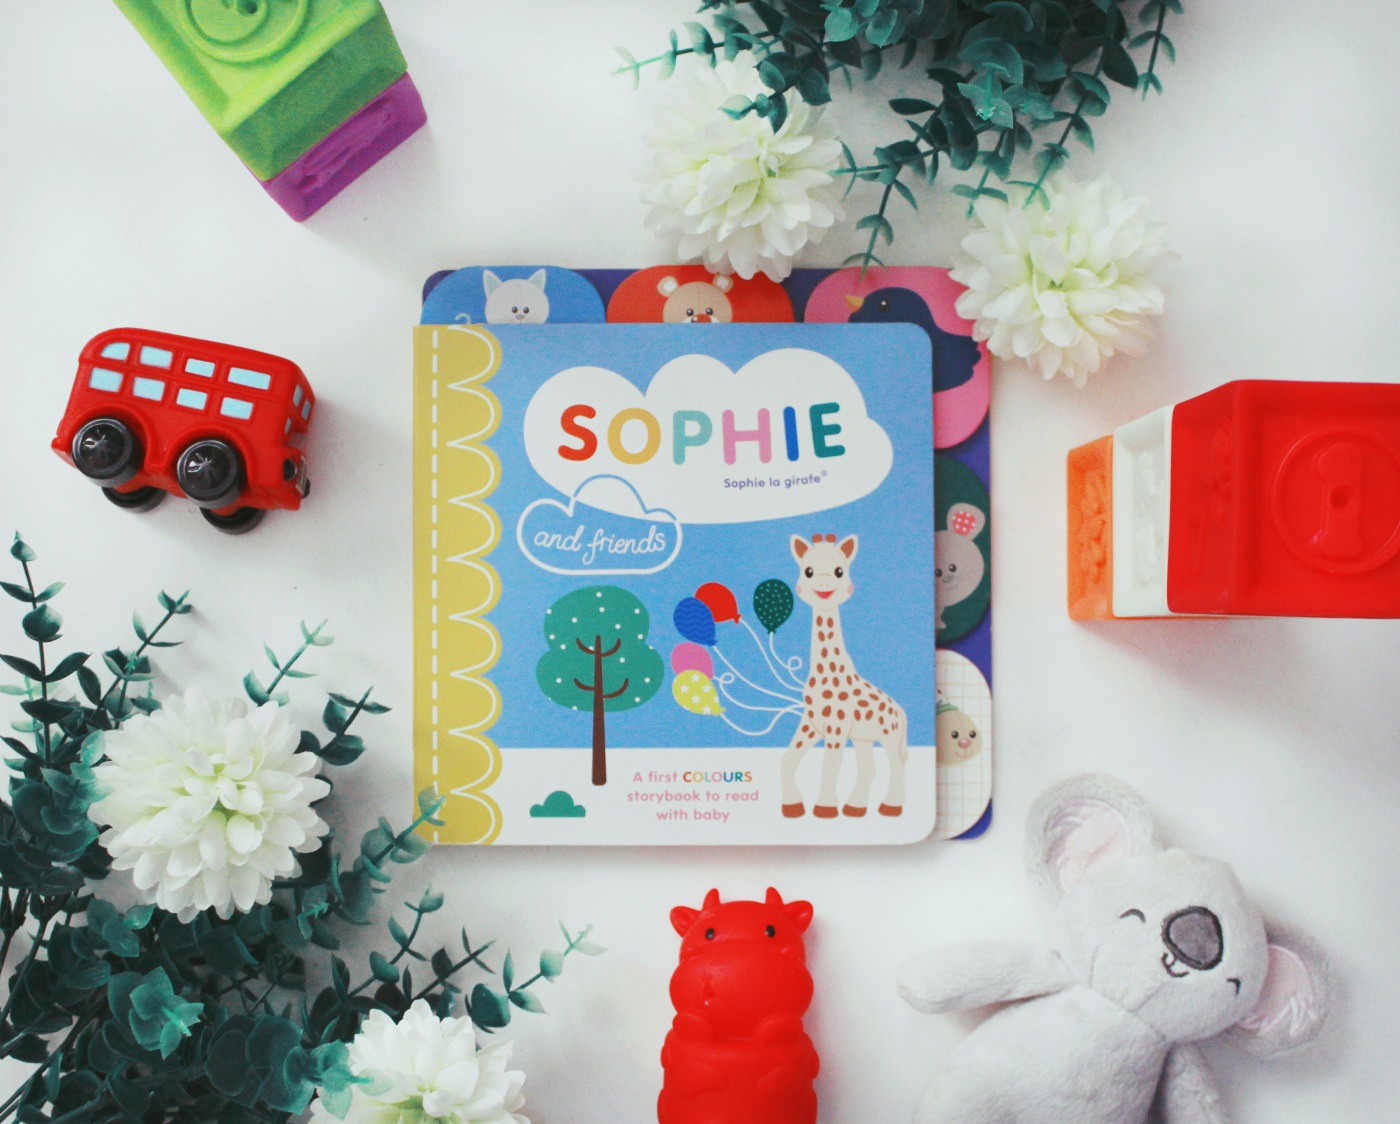 A photo of the book Sophie la girafe, surrounded by childrens toys